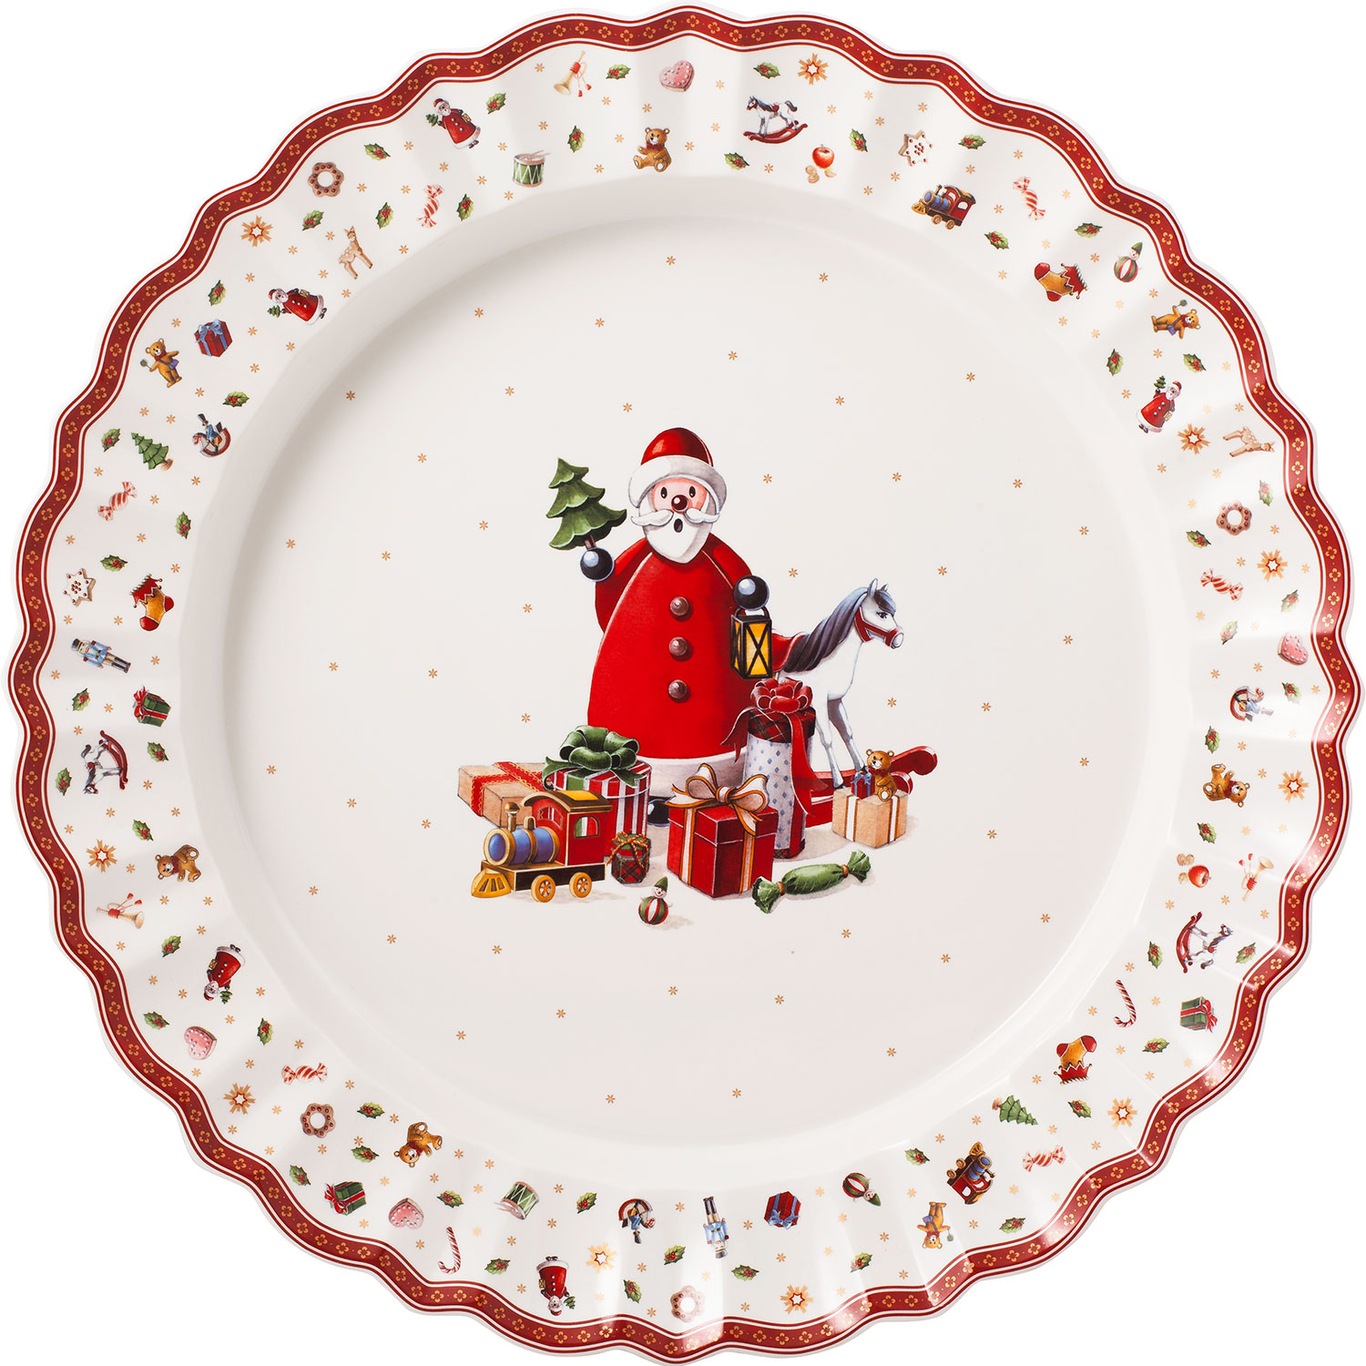 Toy's Delight Serving Plate, 45 cm